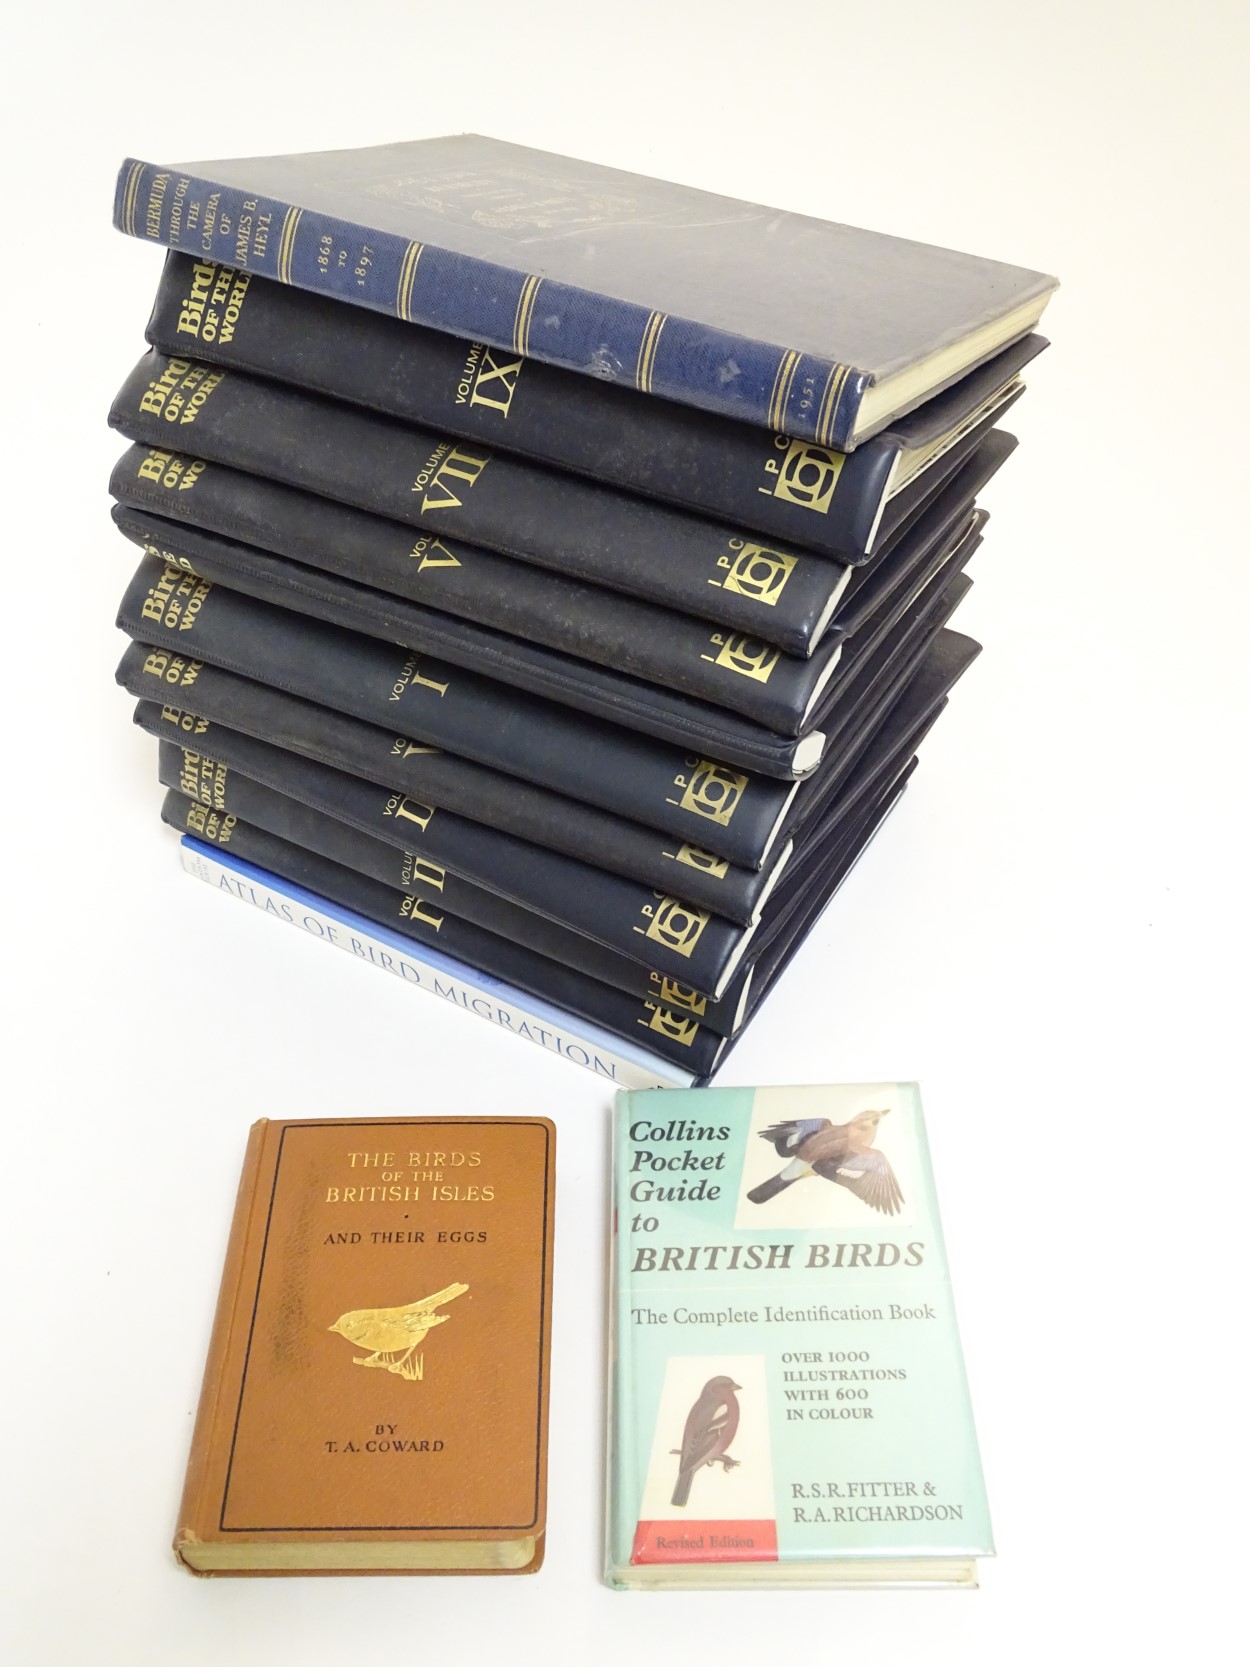 Ornithological Books: A quantity of books on bird subjects comprising 9 volumes on " Birds of the